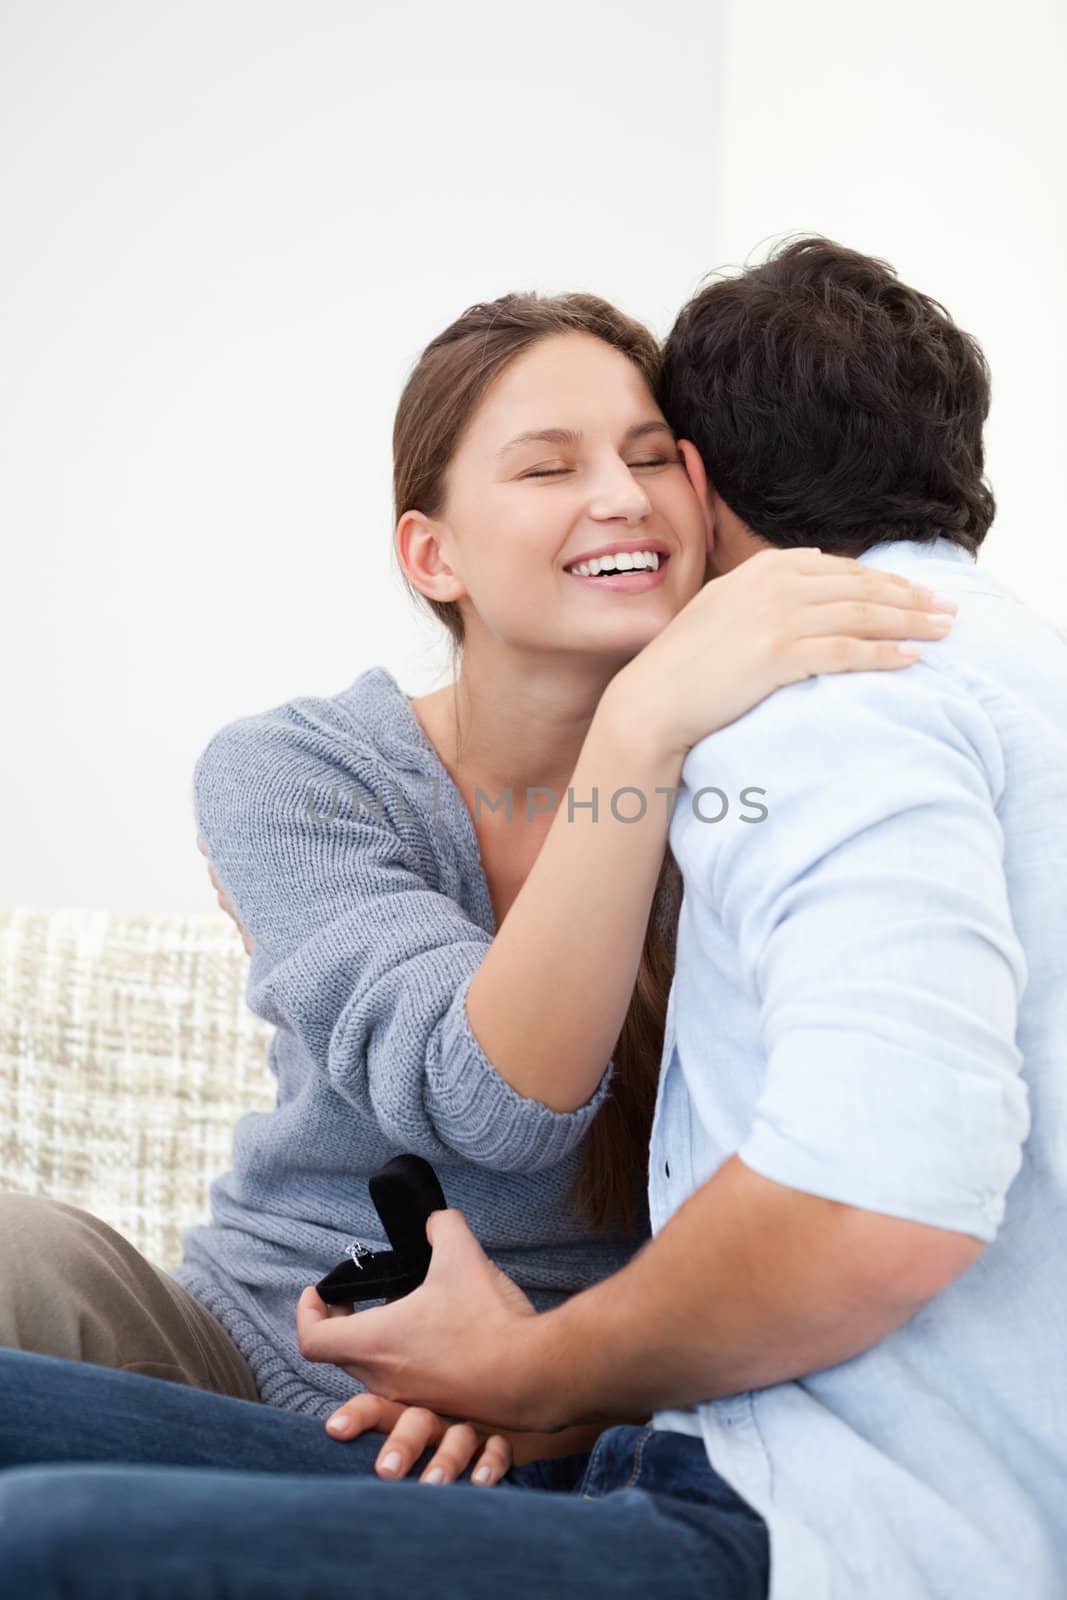 Couple embracing eachother while holding a jewel case against grey background